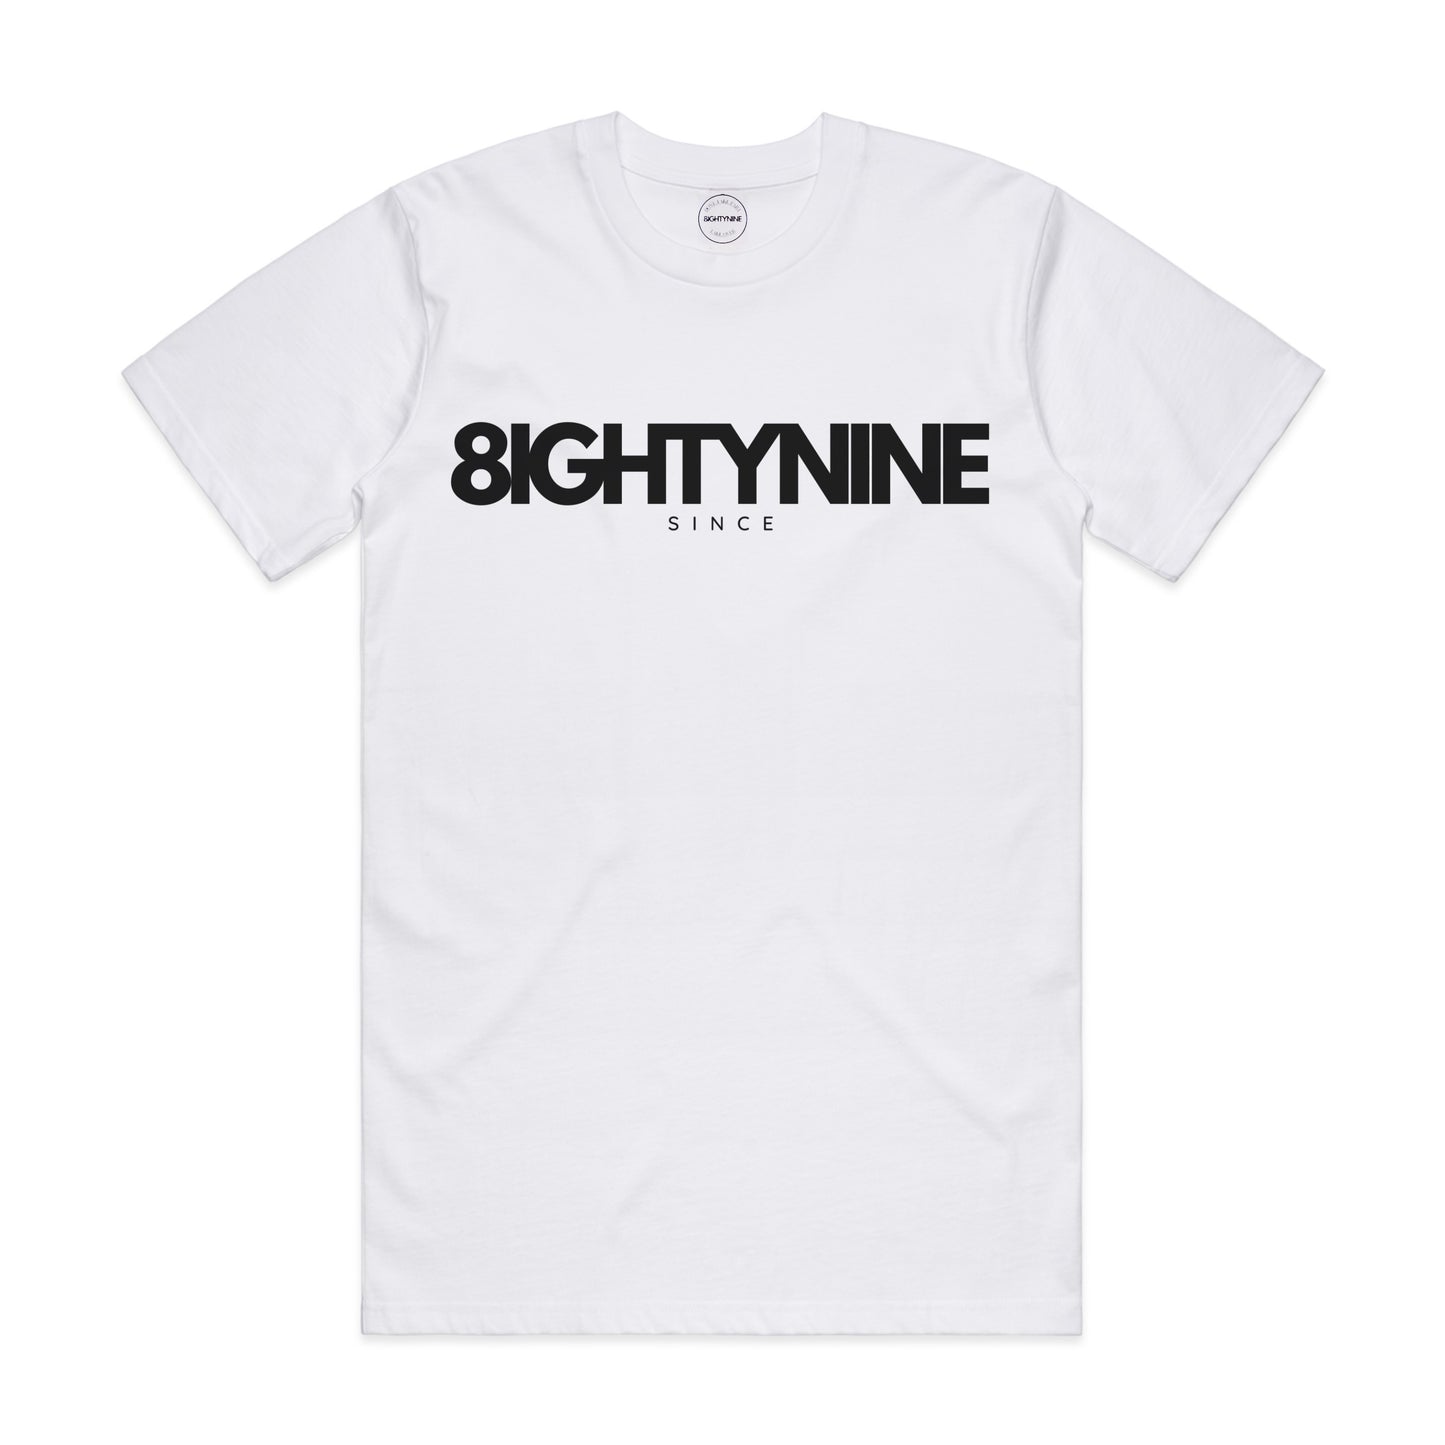 Classic 8IGHTYNINE White Tee S/L